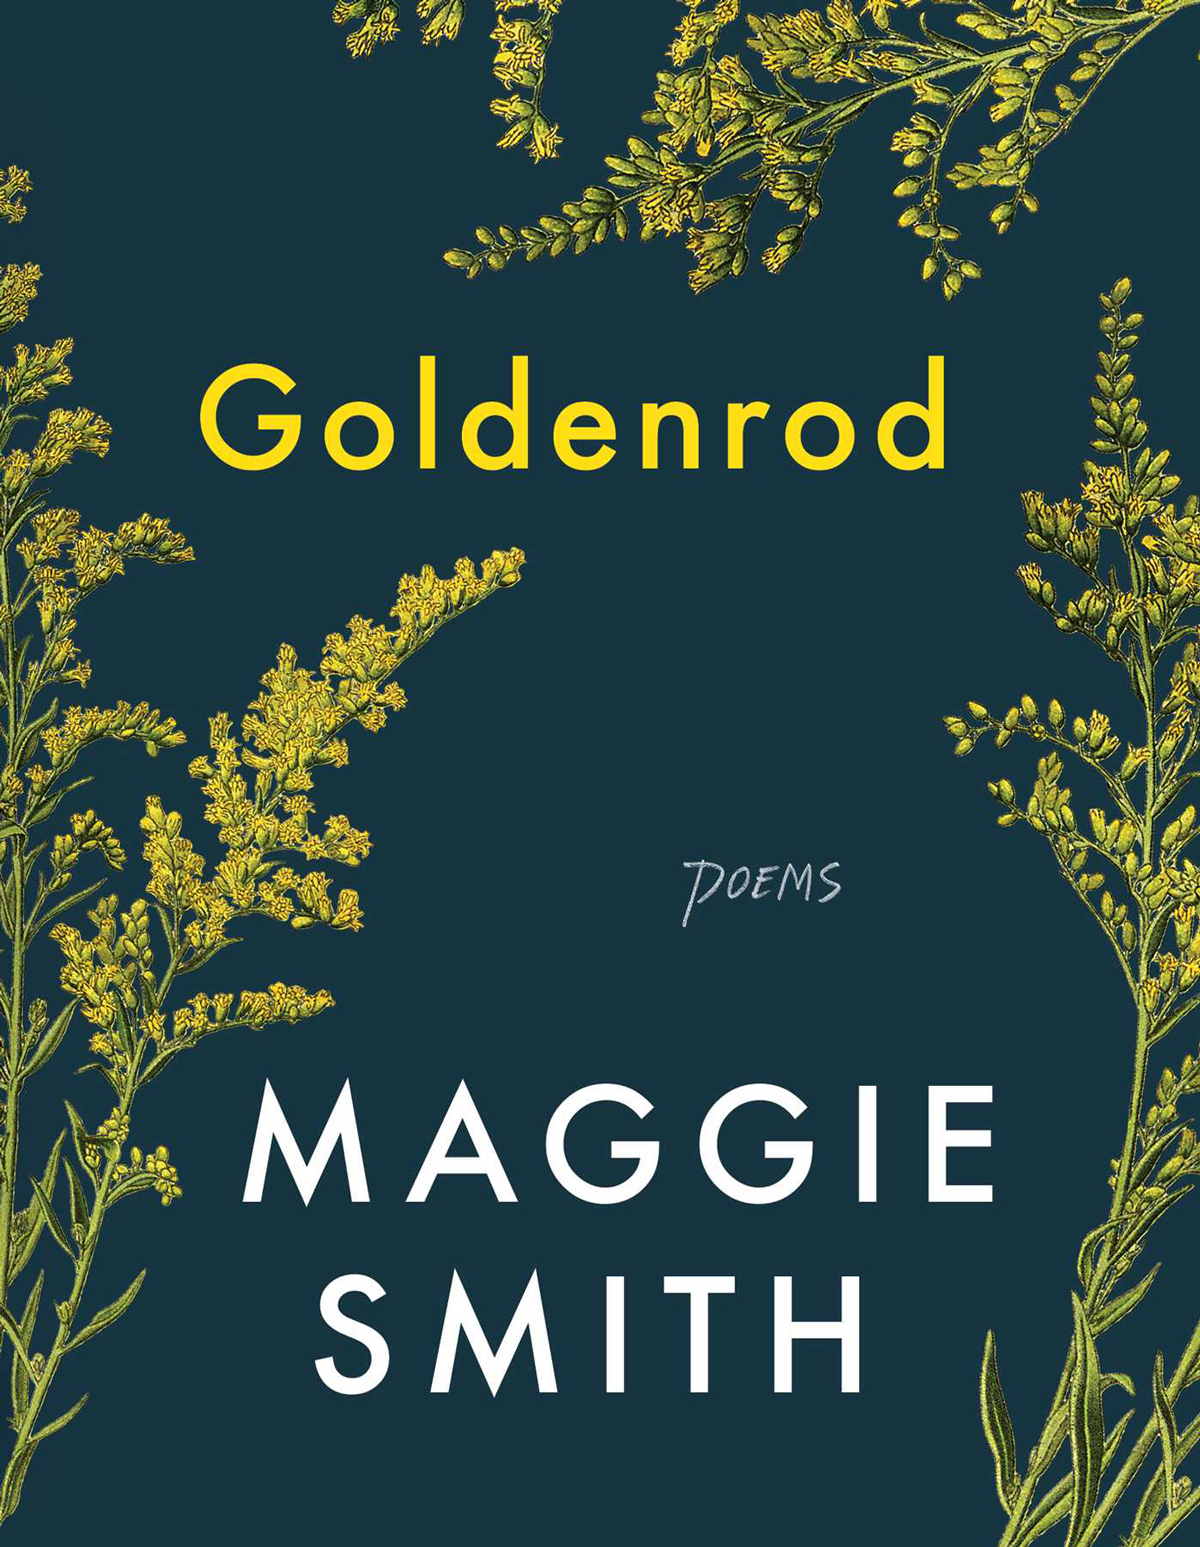 Goldenrod by Maggie Smith